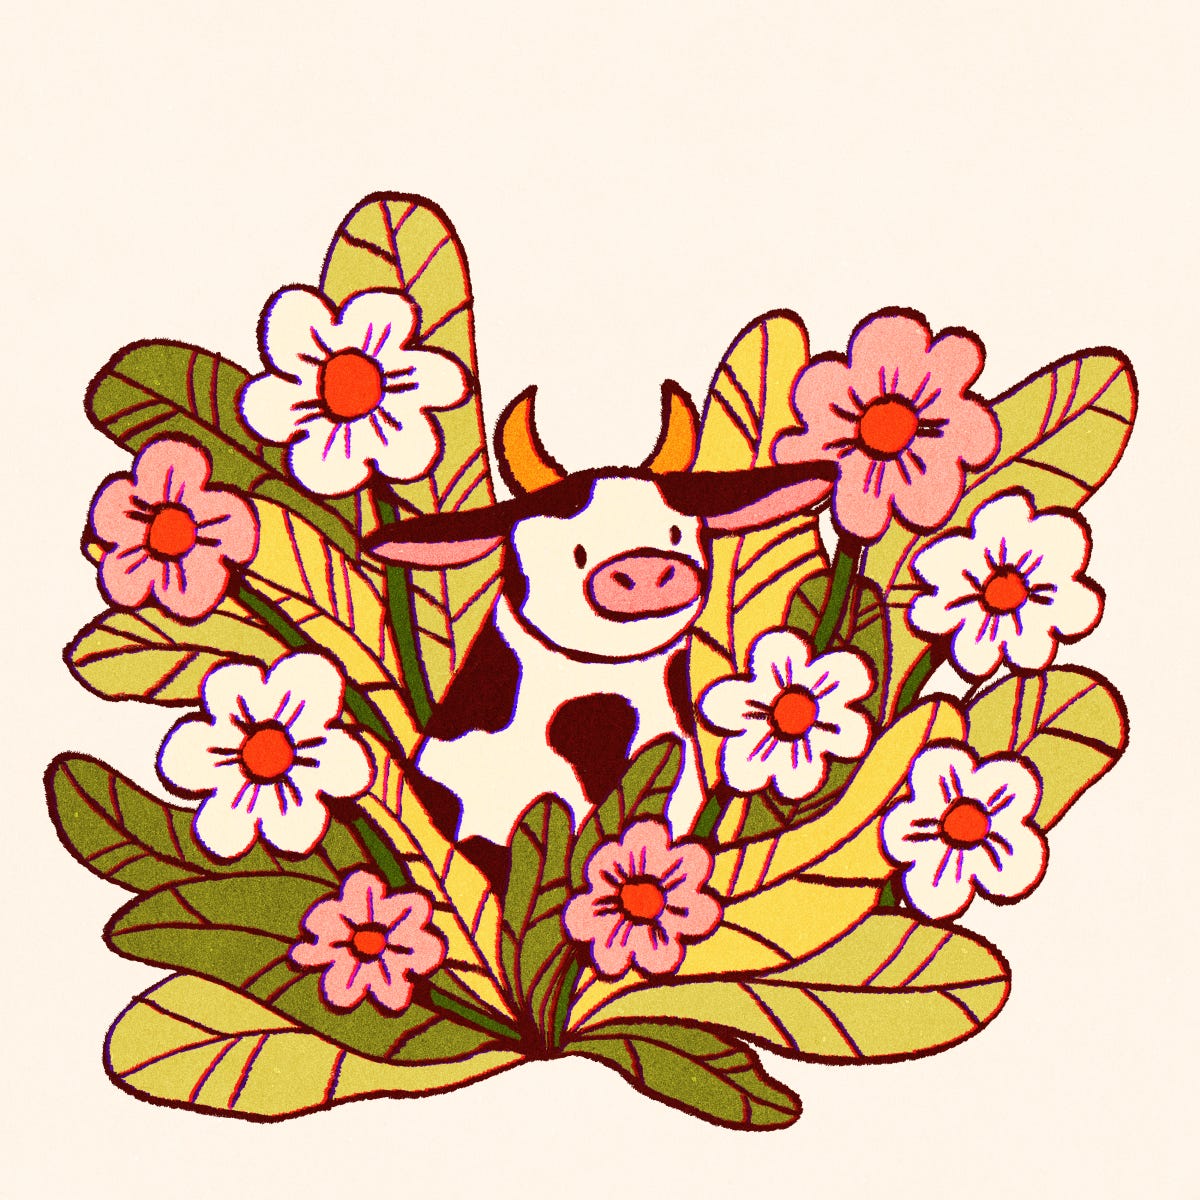 A digital drawing of a cow sitting among some flowers.